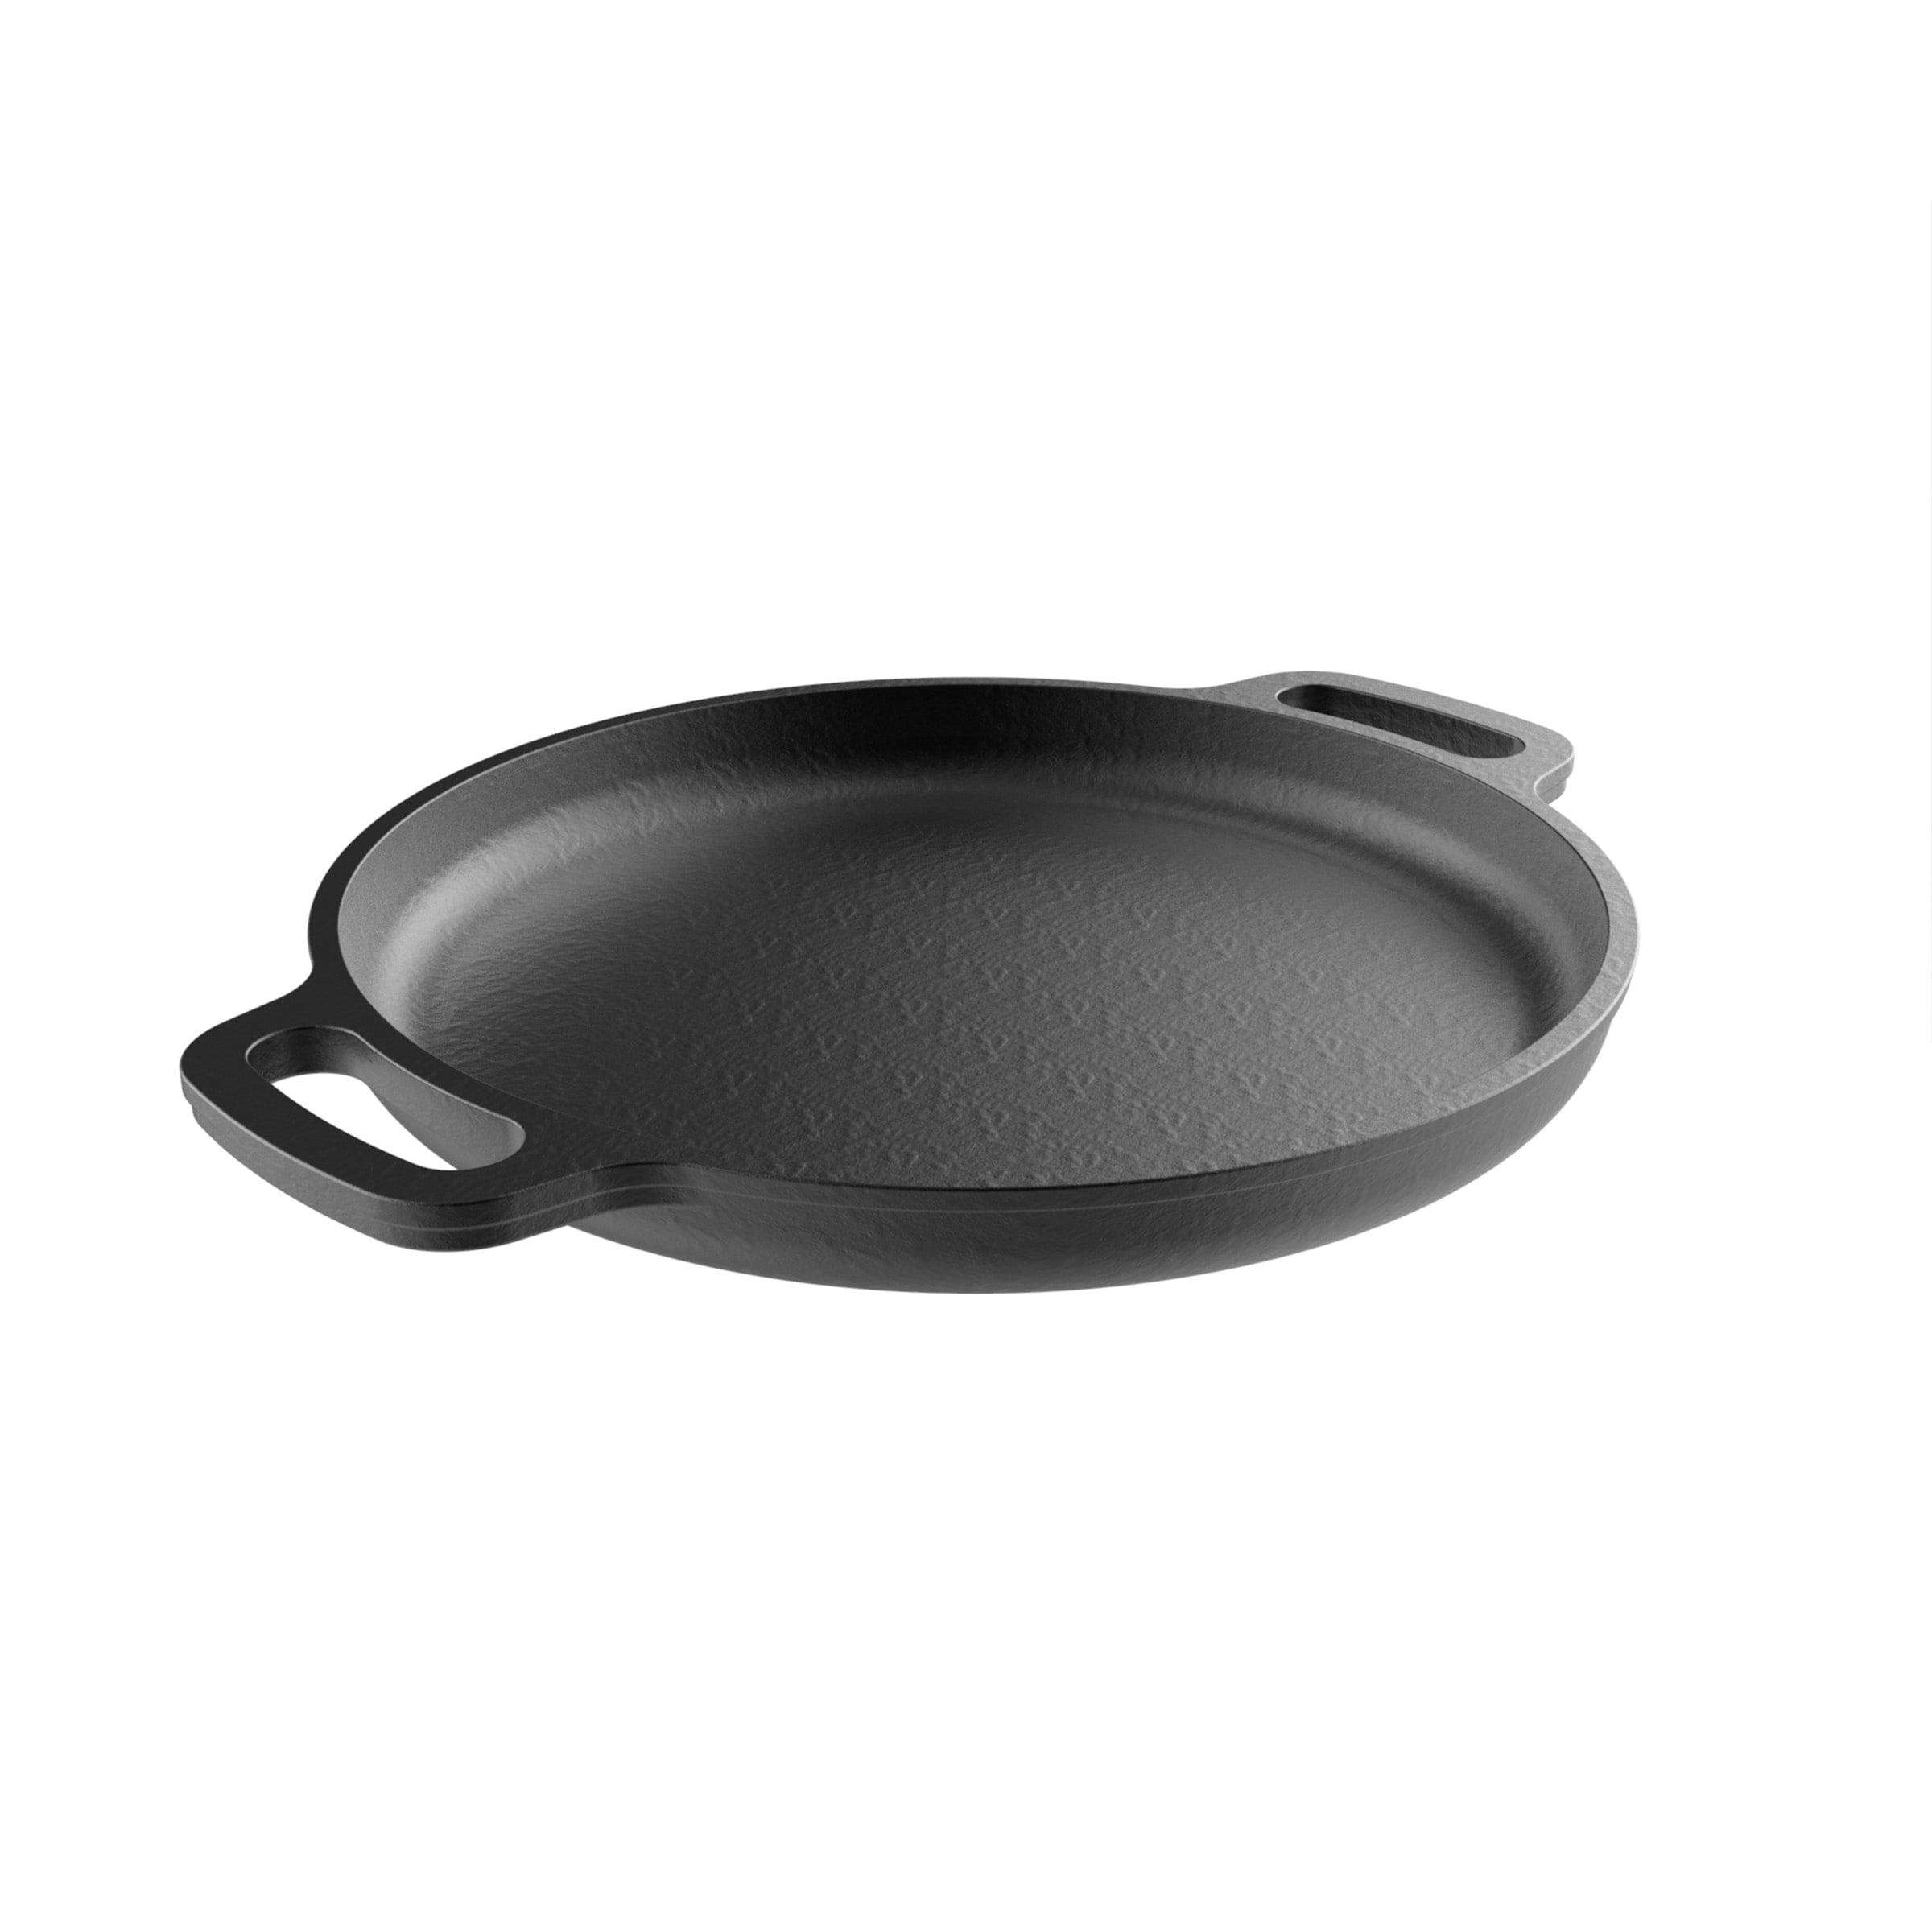 https://ak1.ostkcdn.com/images/products/22897374/Cast-Iron-Pizza-Pan-13.25-Pre-Seasoned-Skillet-for-Cooking-Baking-Grilling-Durable-Long-Lasting-by-Classic-Cuisine-3e5b0f9c-b8b5-46a3-944a-de56ecbe7674.jpg